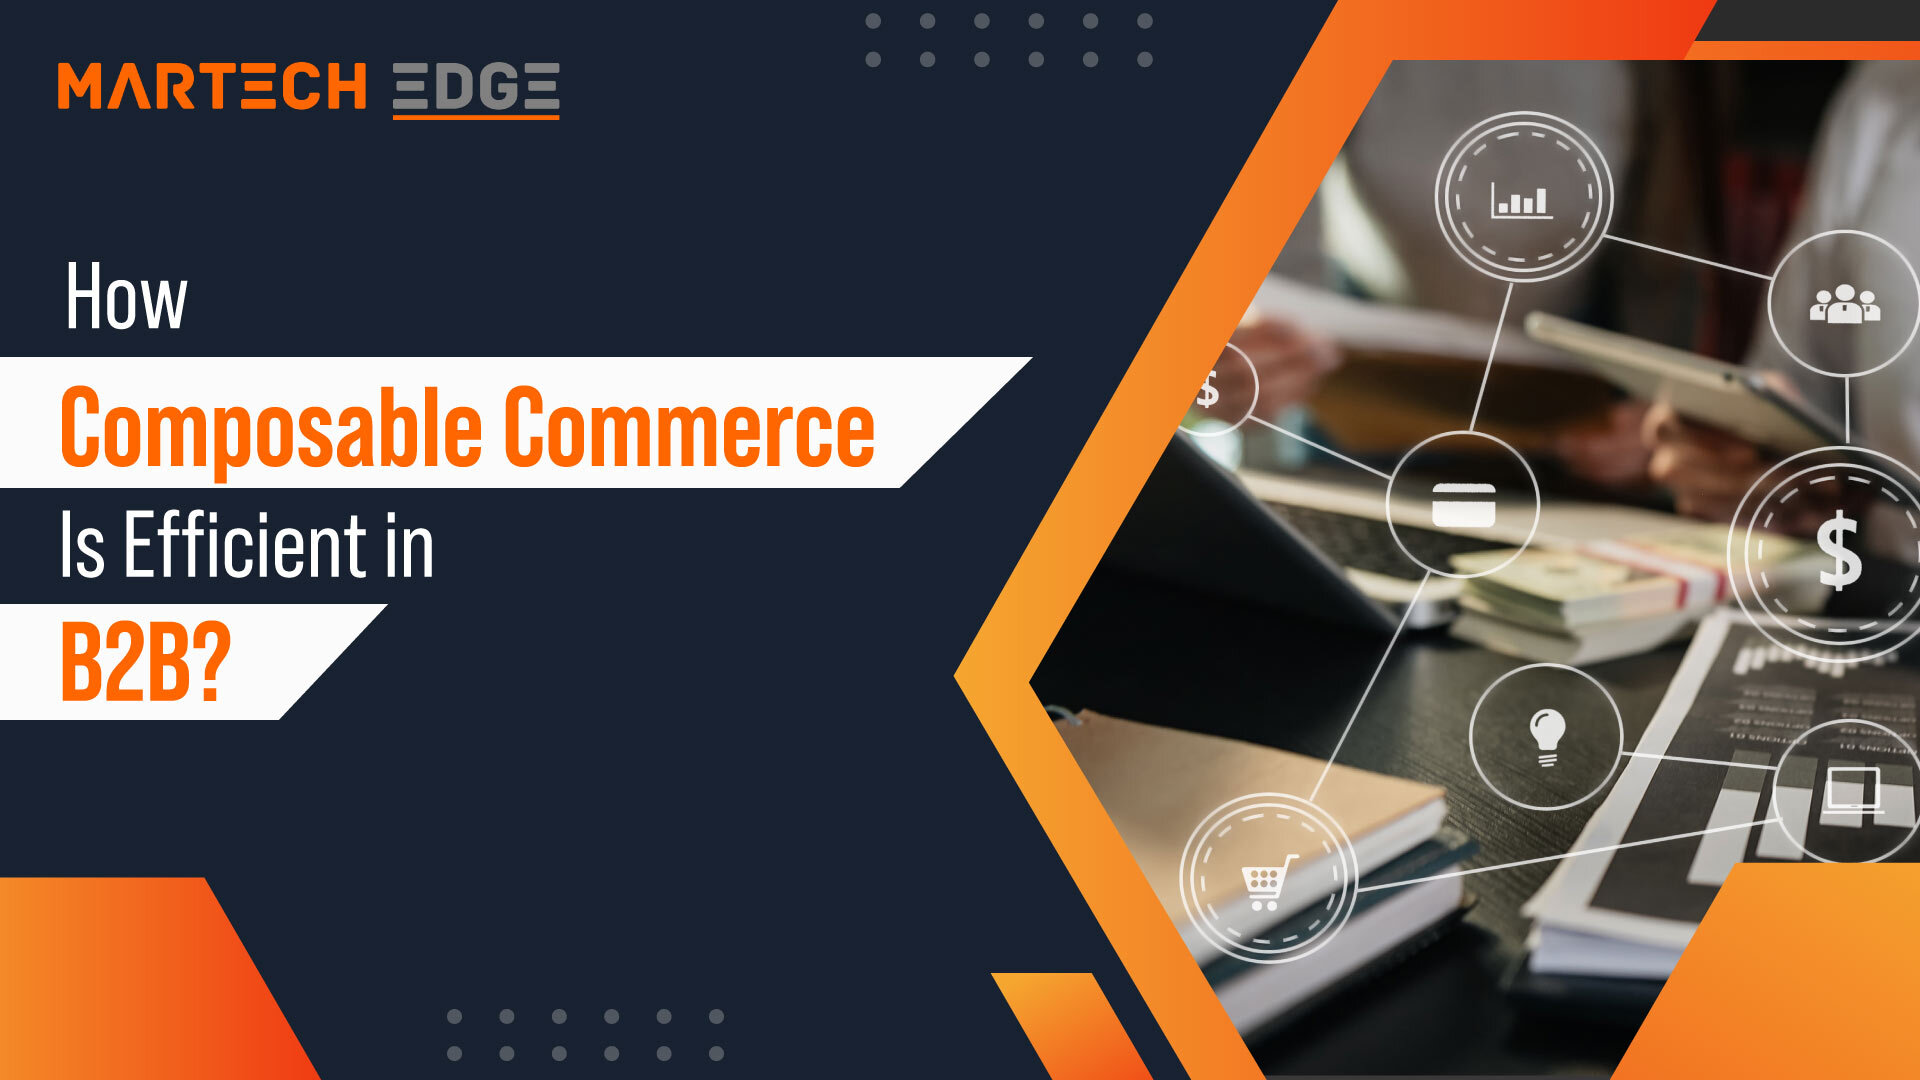 How Composable Commerce is Efficient in B2B?